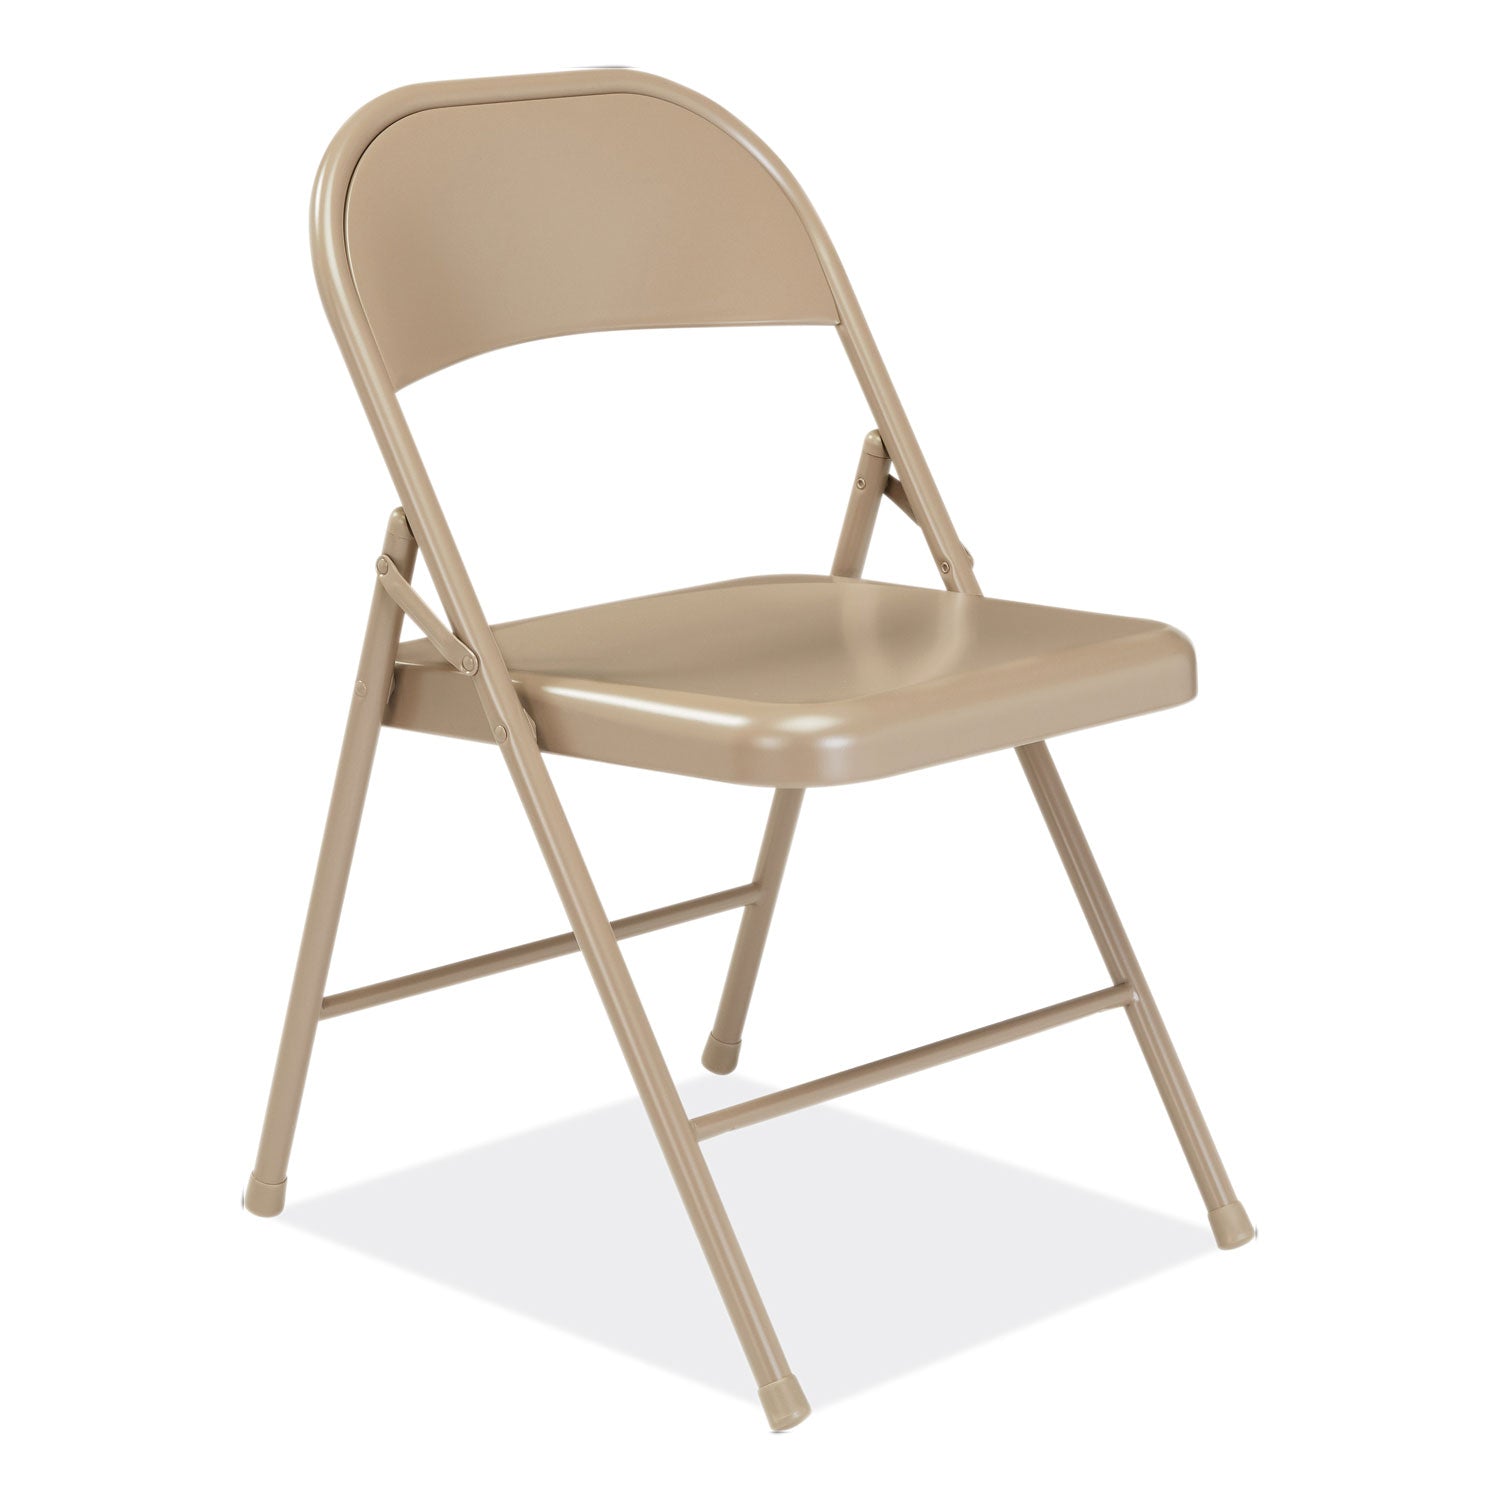 900-series-all-steel-folding-chair-supports-250lb-1775-seat-height-beige-seat-back-base-4-ctships-in-1-3-business-days_nps901 - 2